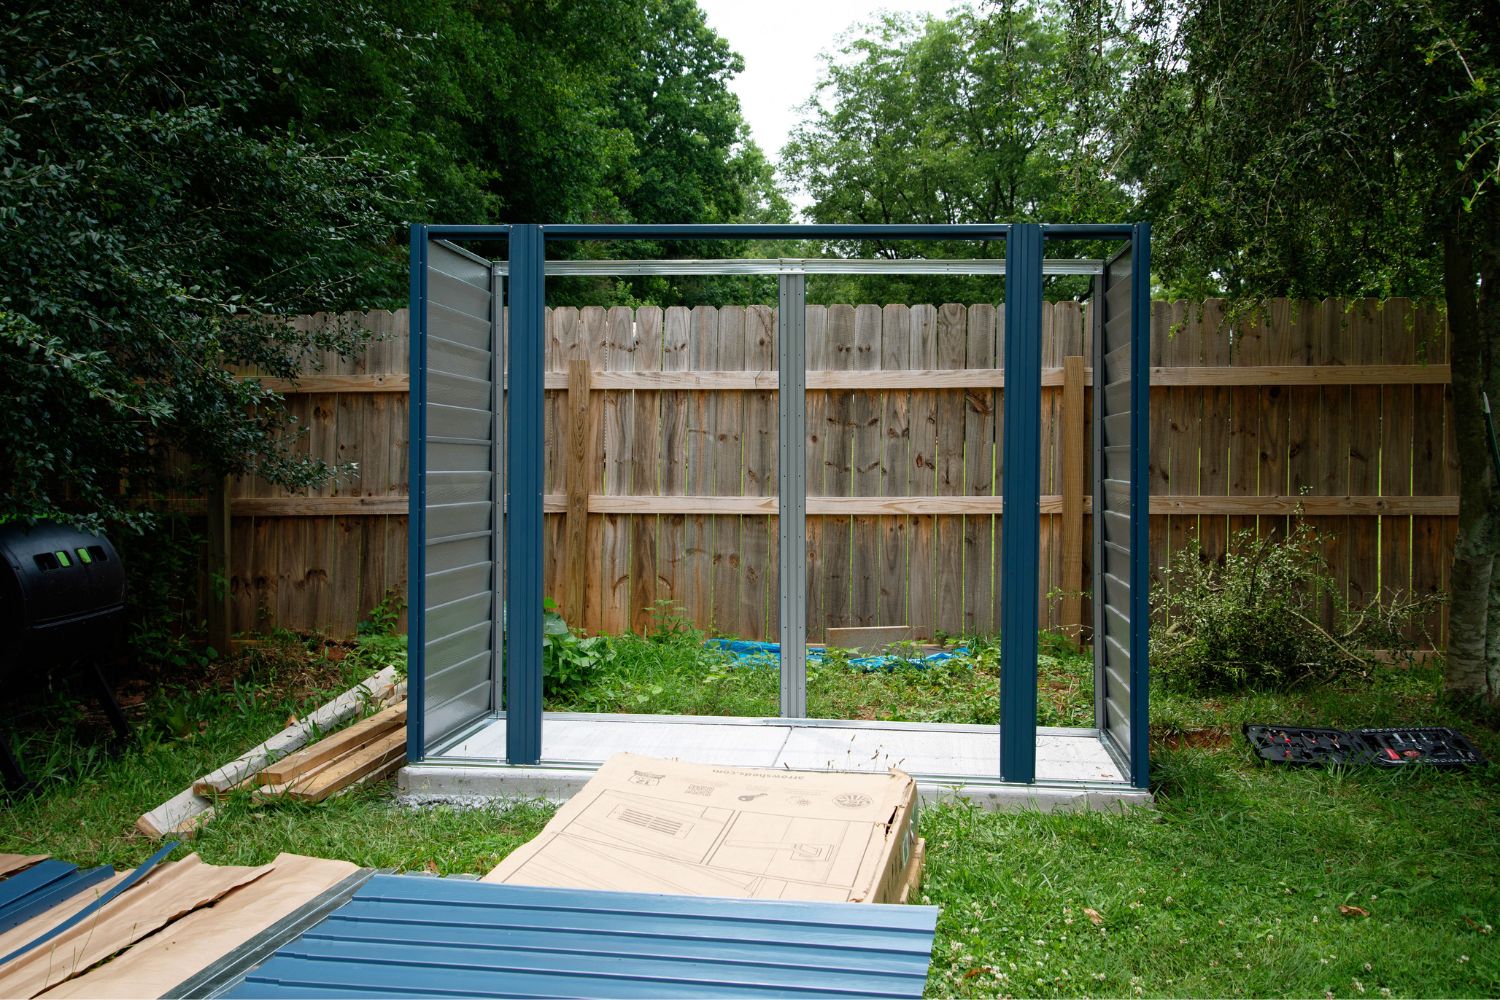 The frame of the ShelterLogic storage shed installed on a cement pad